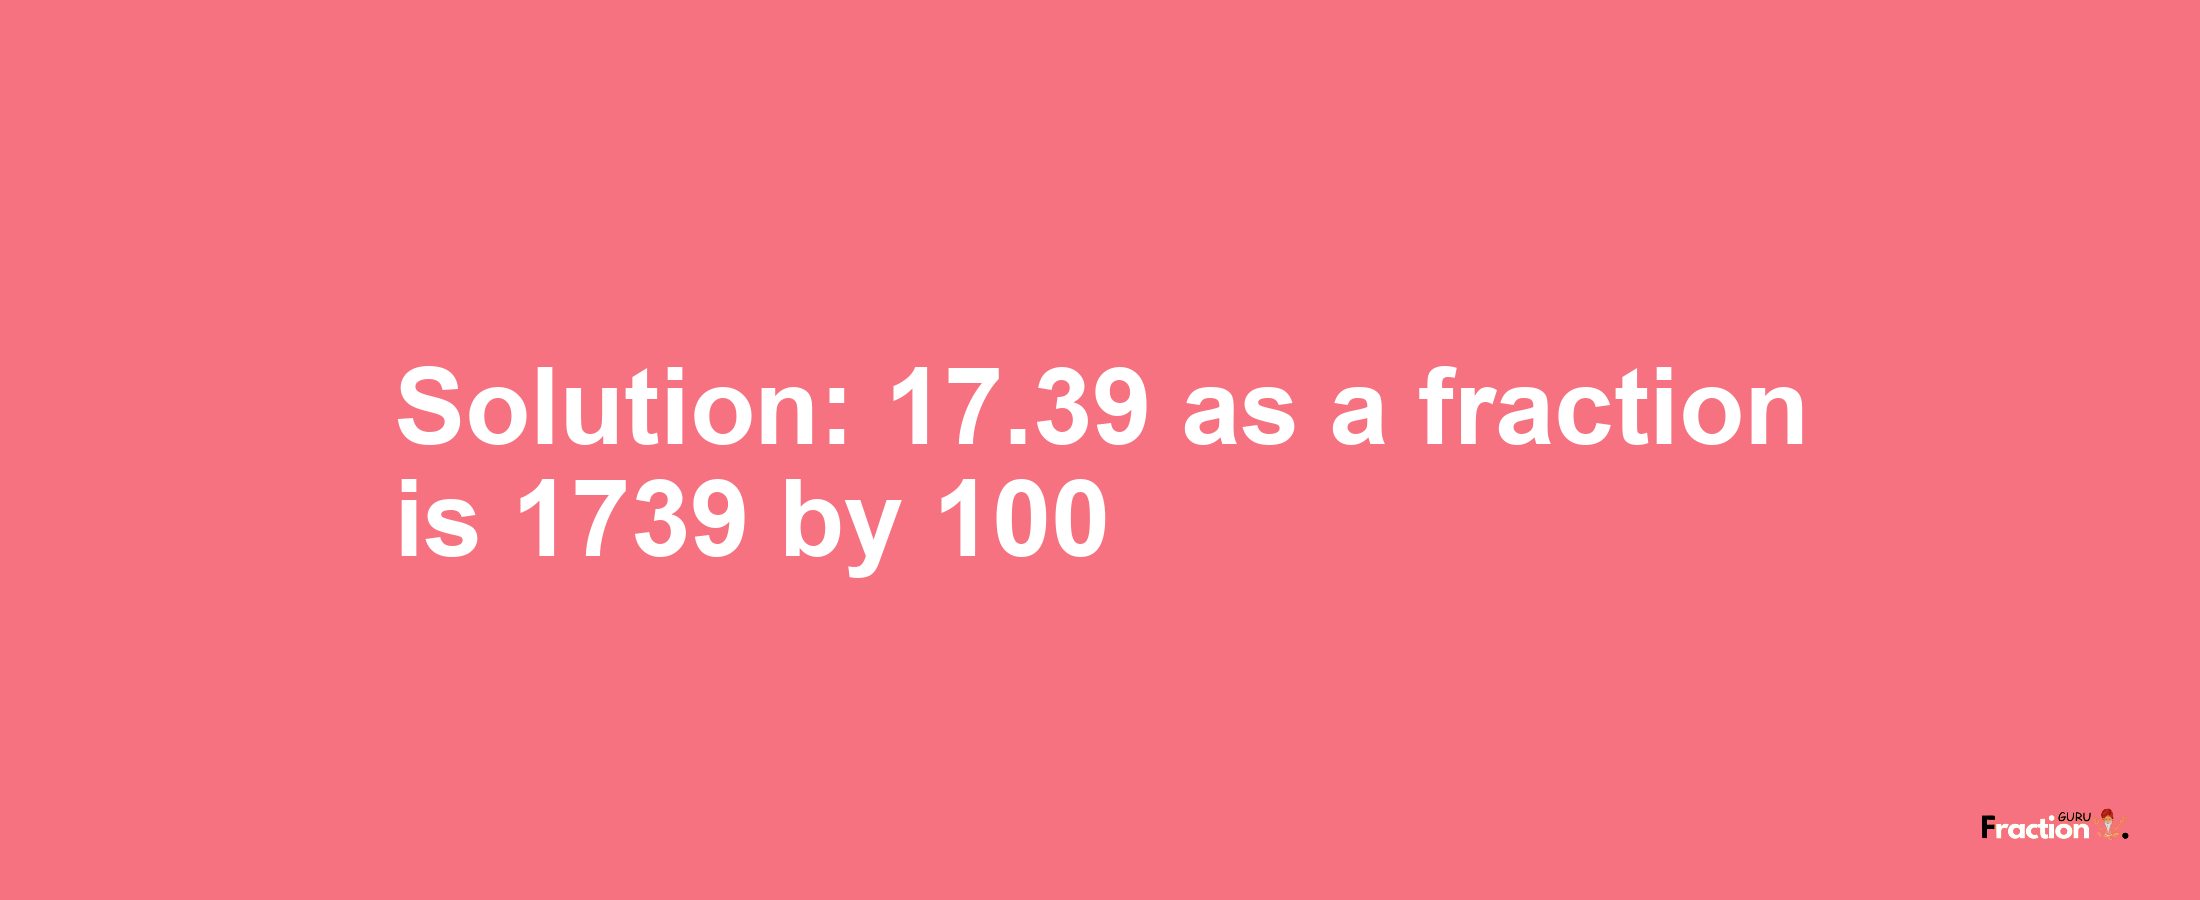 Solution:17.39 as a fraction is 1739/100